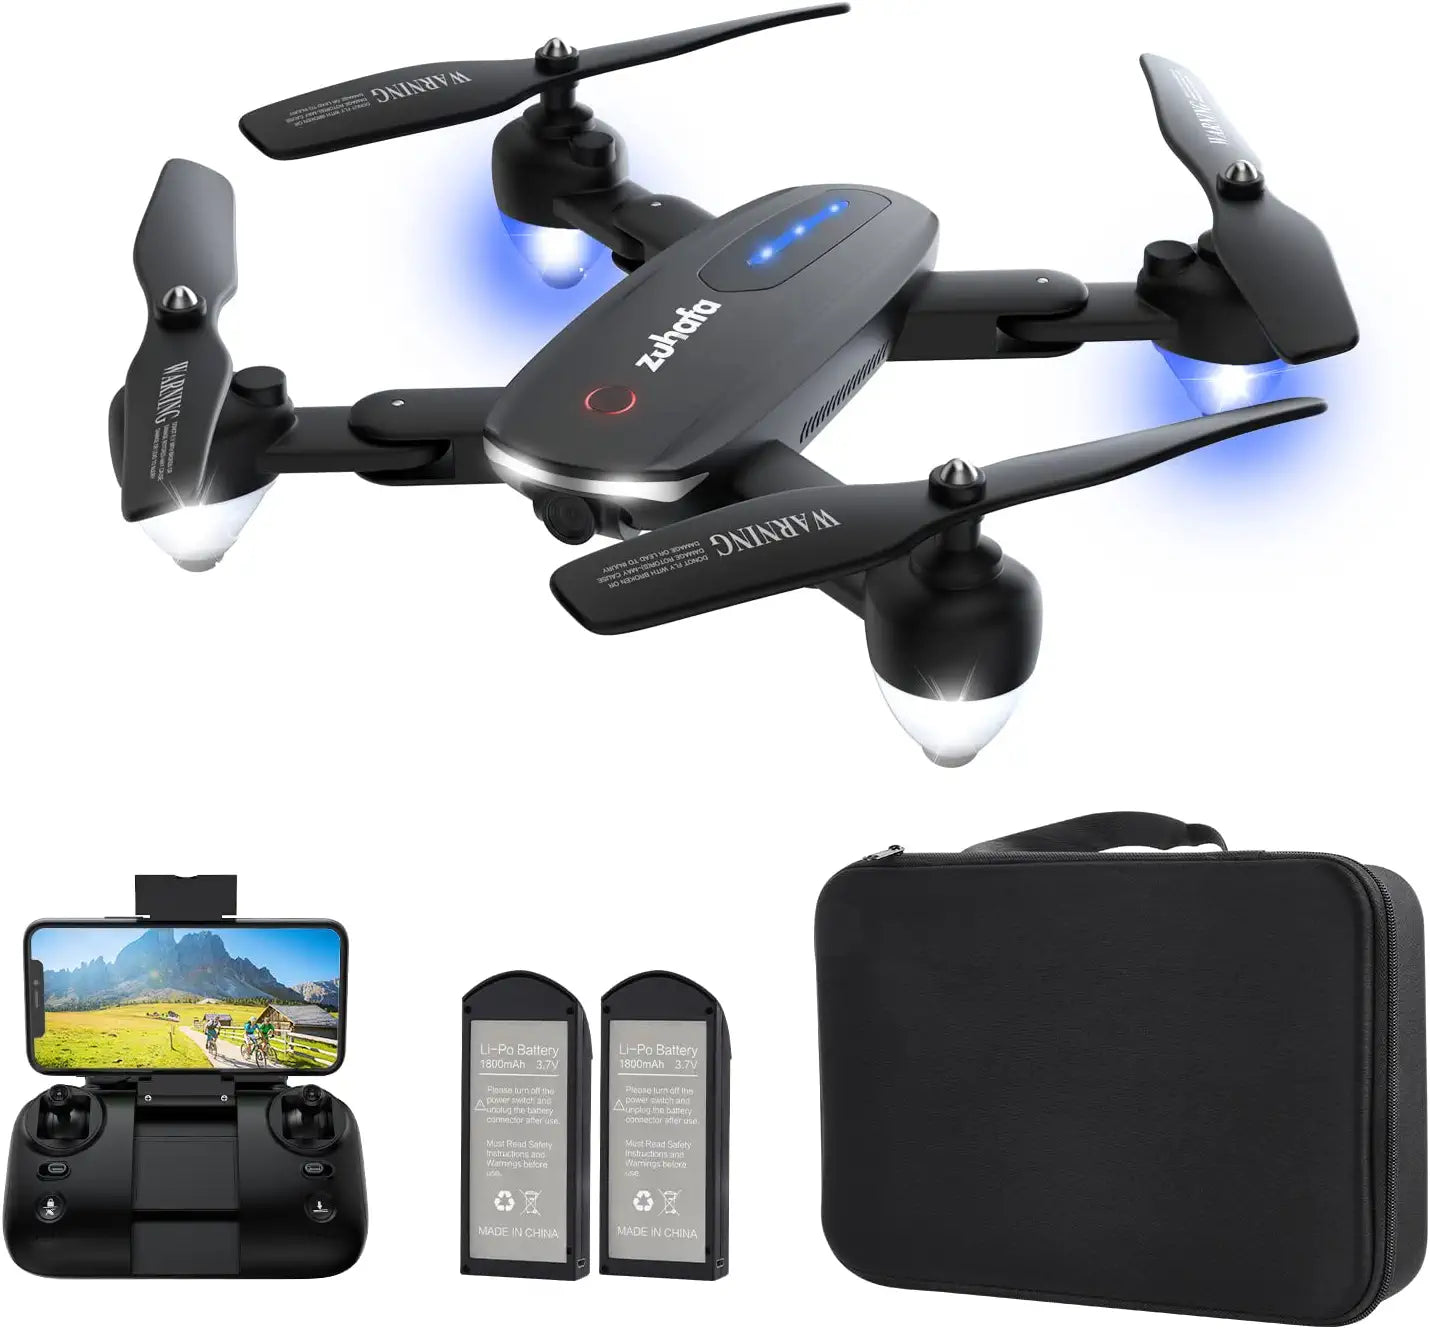 Zuhafa T4 Drone - with 1080P HD Camera for Adults and Kids,30-min Flight Time ,Gesture Control, Altitude Hold, Headless Mode, 3D Flips,RC Quadcopter with App FPV Video,2 Batteries,Carrying Case - RCDrone